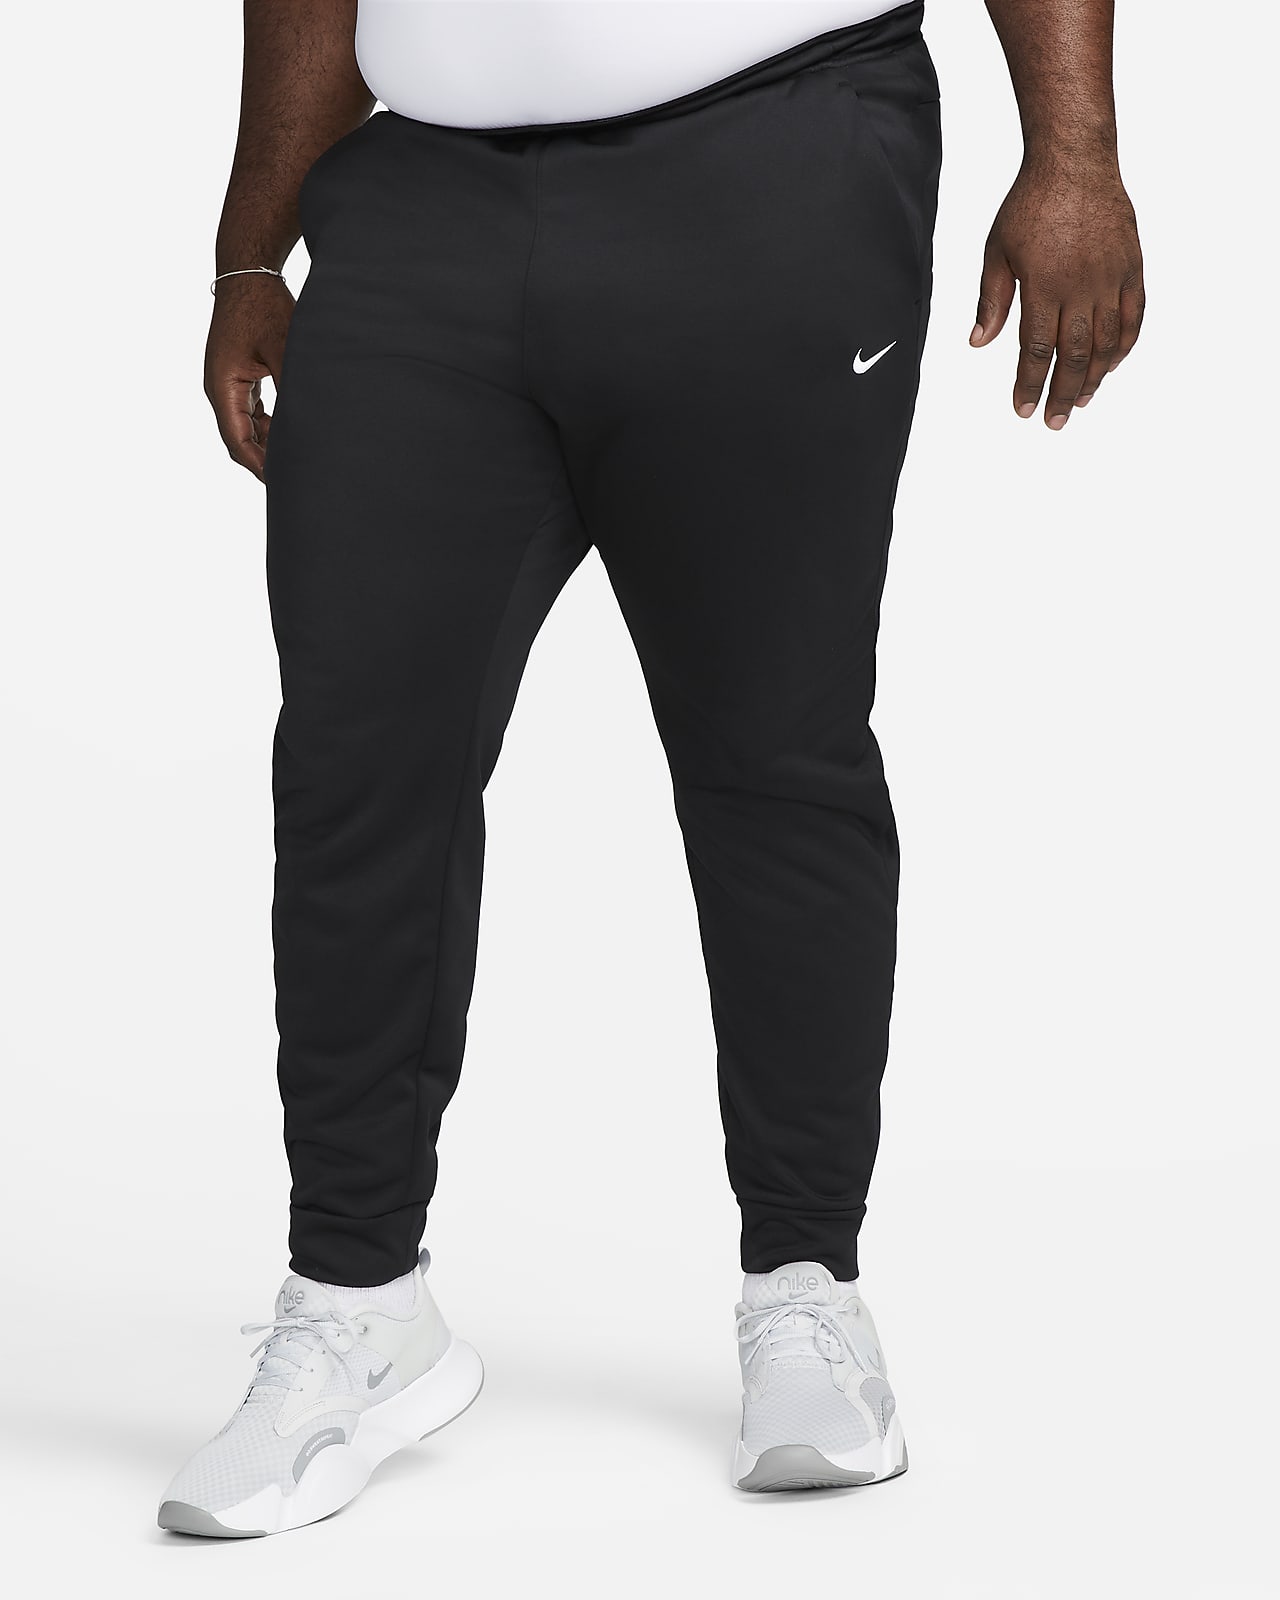 atomair overschot knal Nike Therma Men's Therma-FIT Tapered Fitness Trousers. Nike NL